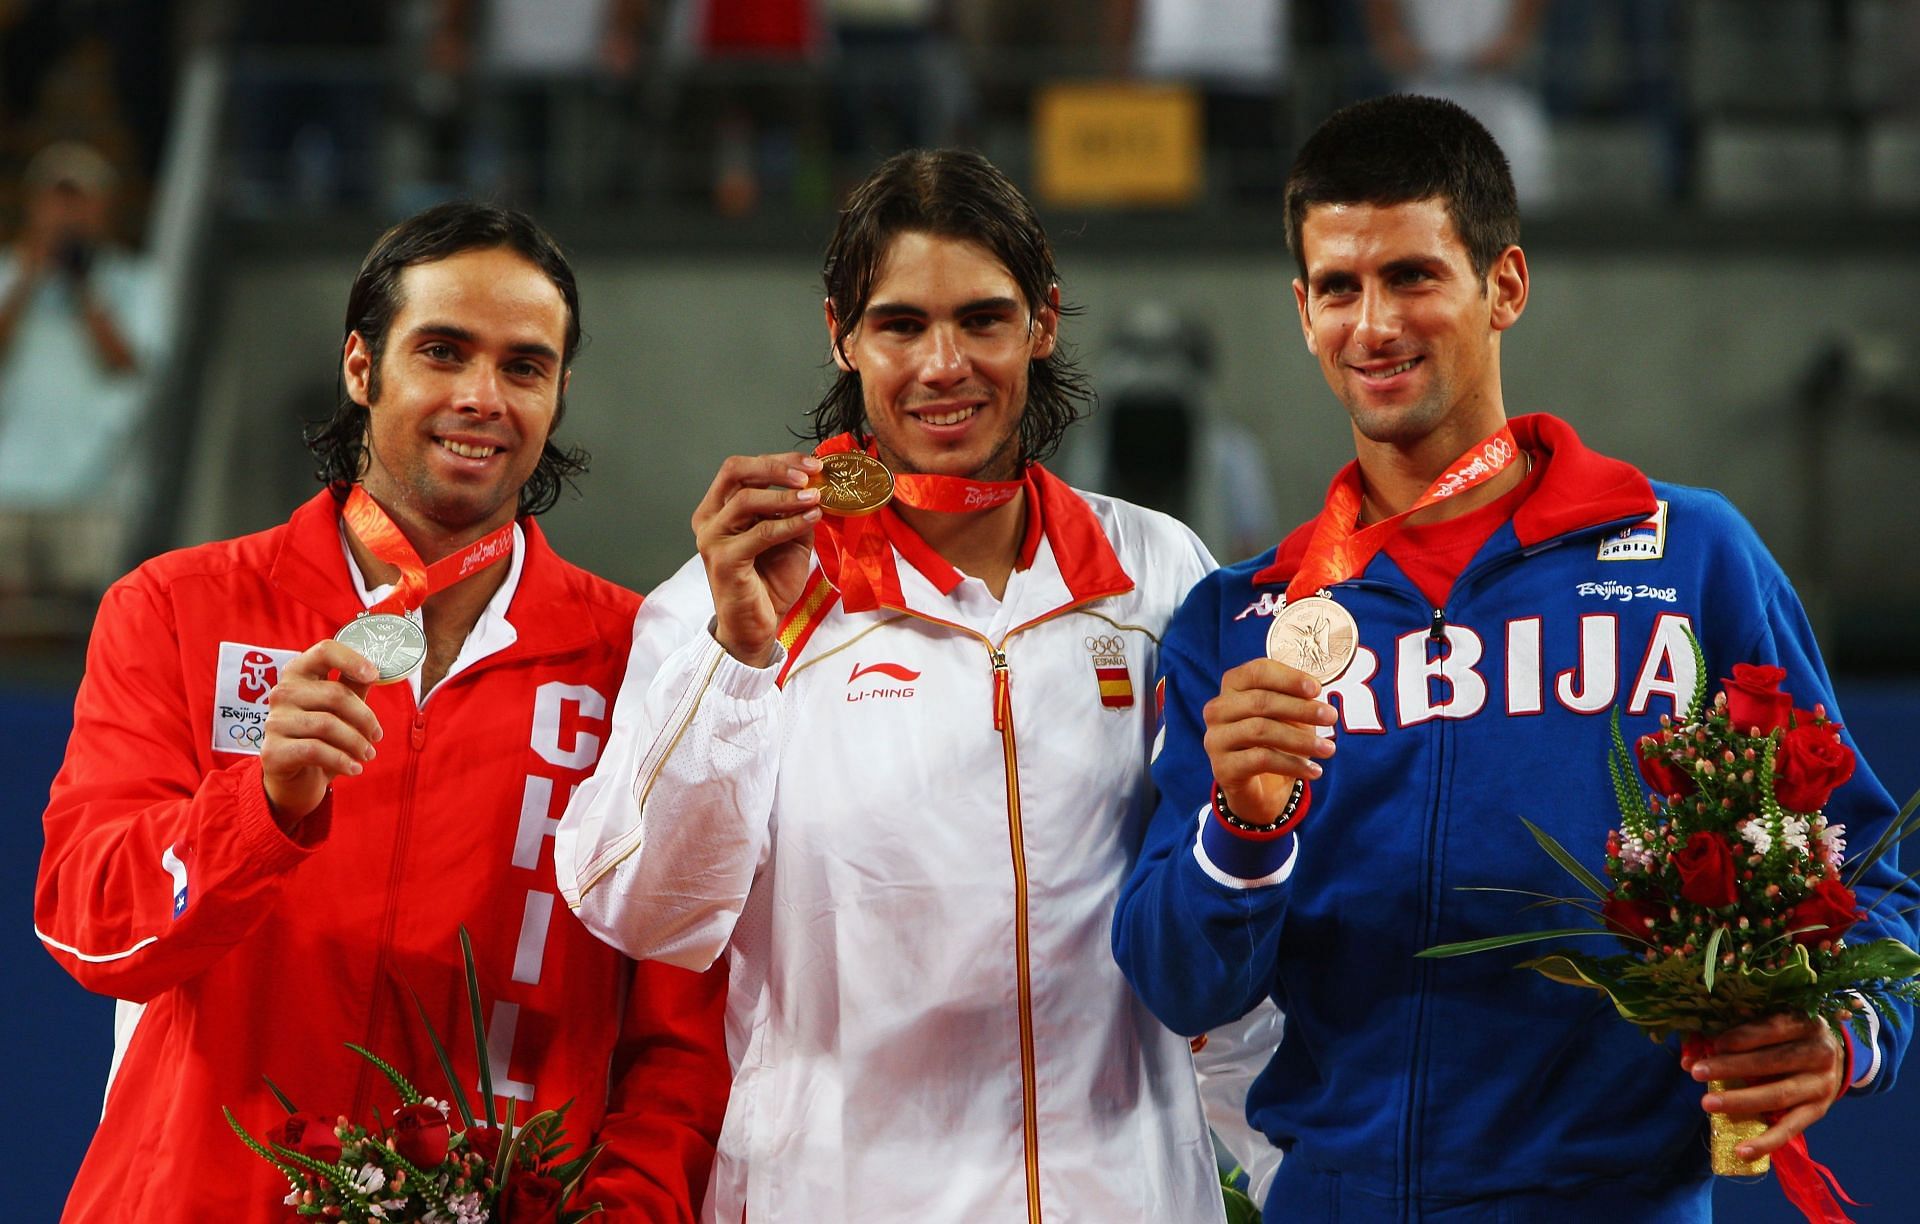 Rafael Nadal, Fernando Gonzalez and Novak Djokovic celebrate with their respective gold, silver and bronze medals at the 2008 Beijing Olympics